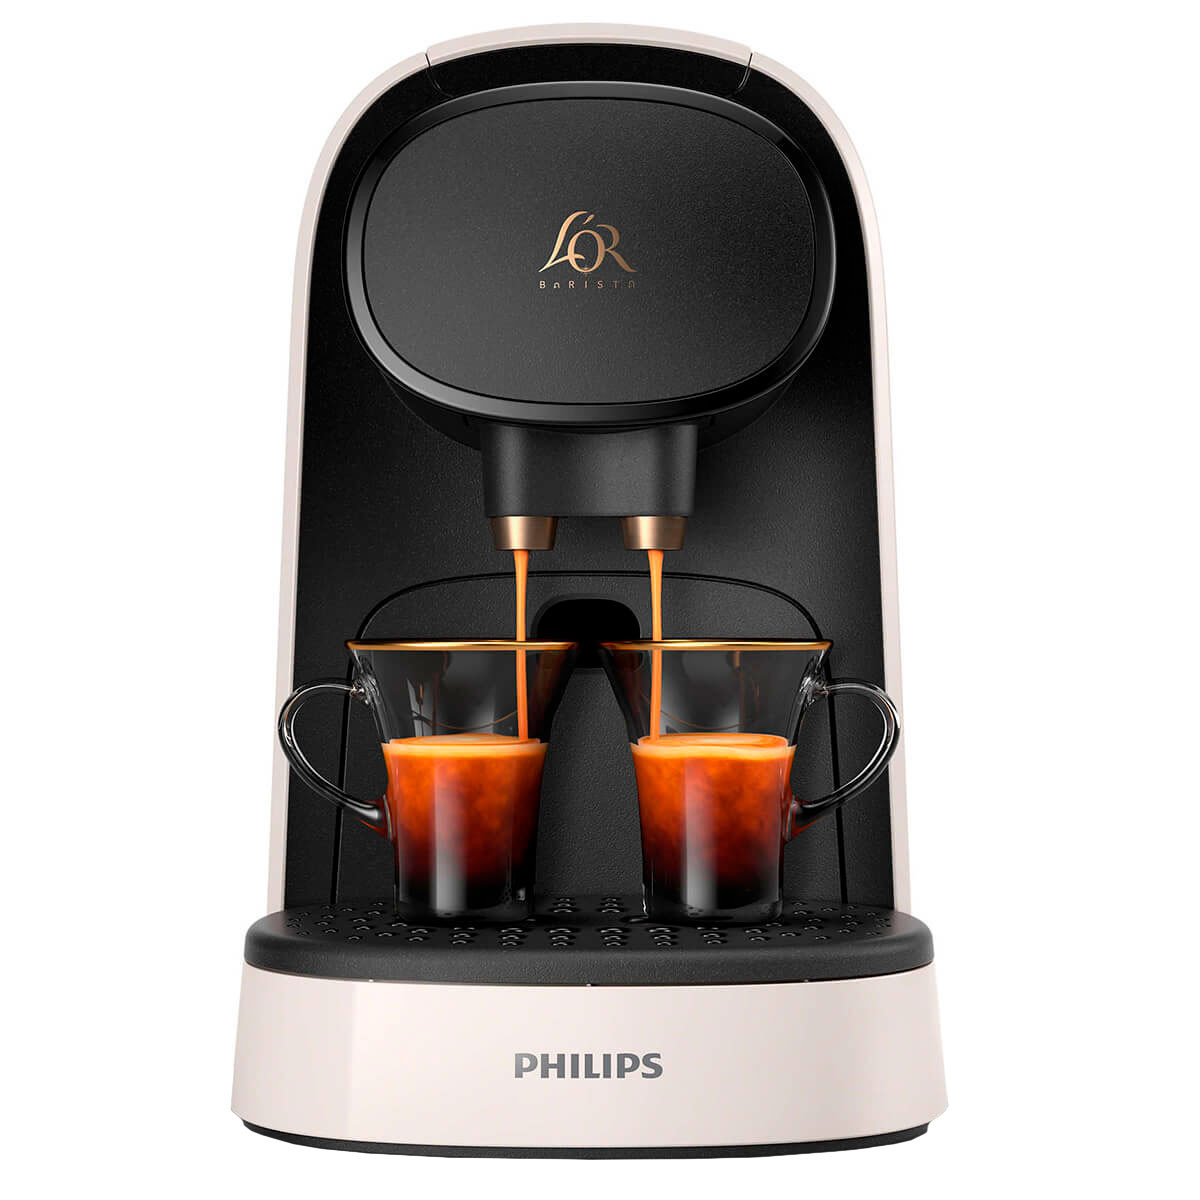 CAFETERA PHILIPS L'OR BARISTA SYSTEM LM8012/00